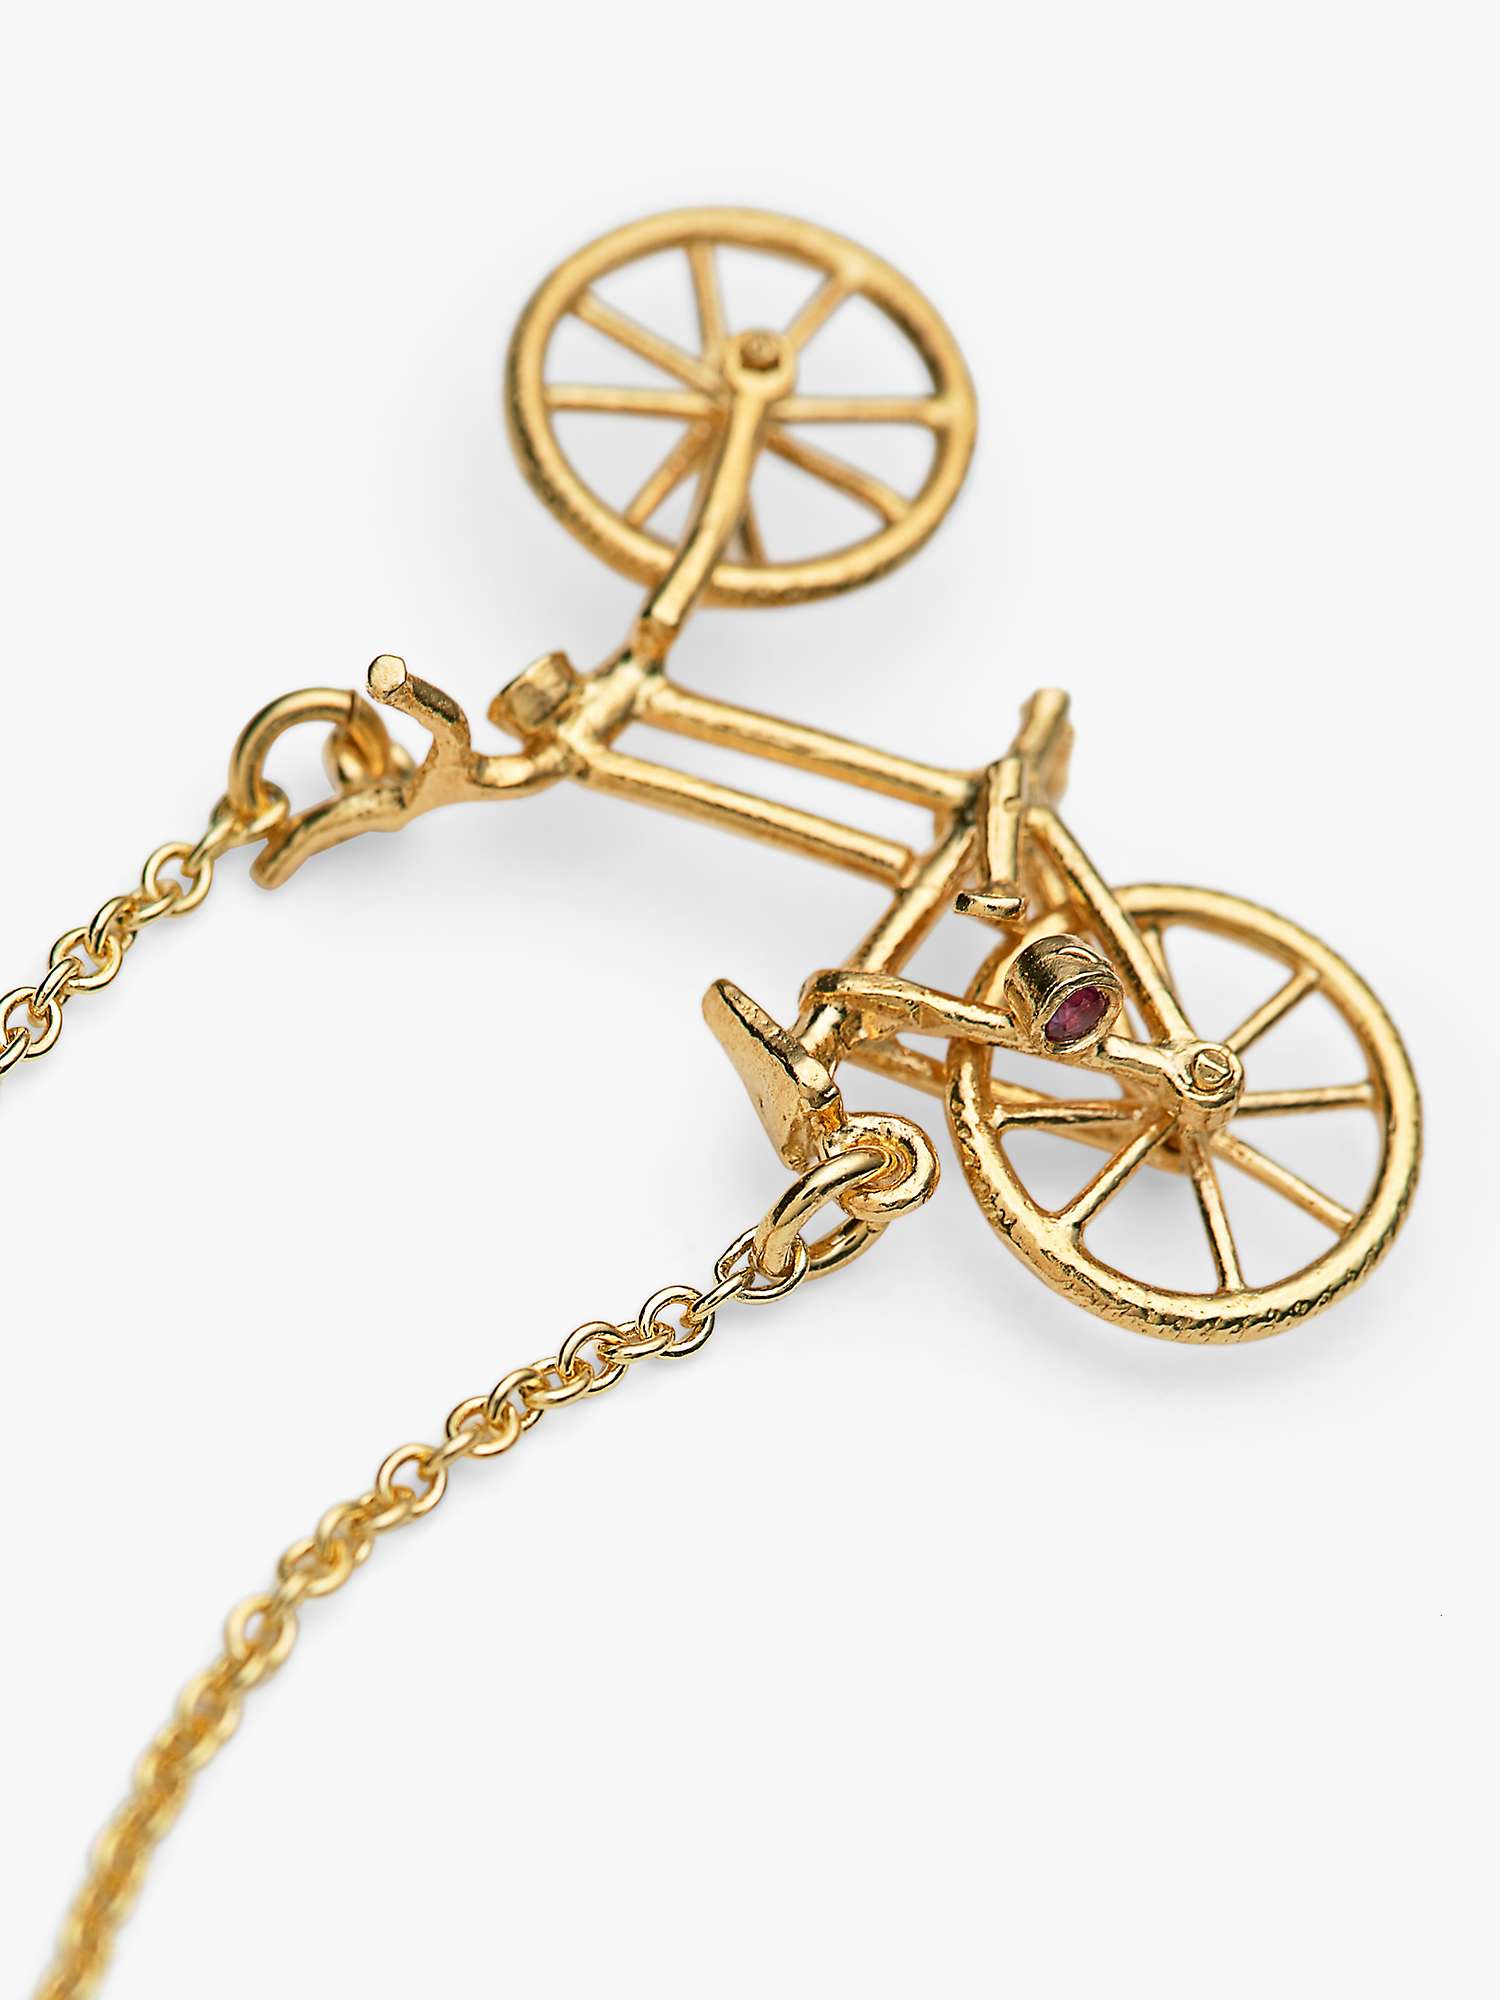 Buy Alex Monroe Bicycle Diamond Ruby Pendant Necklace, Gold Online at johnlewis.com